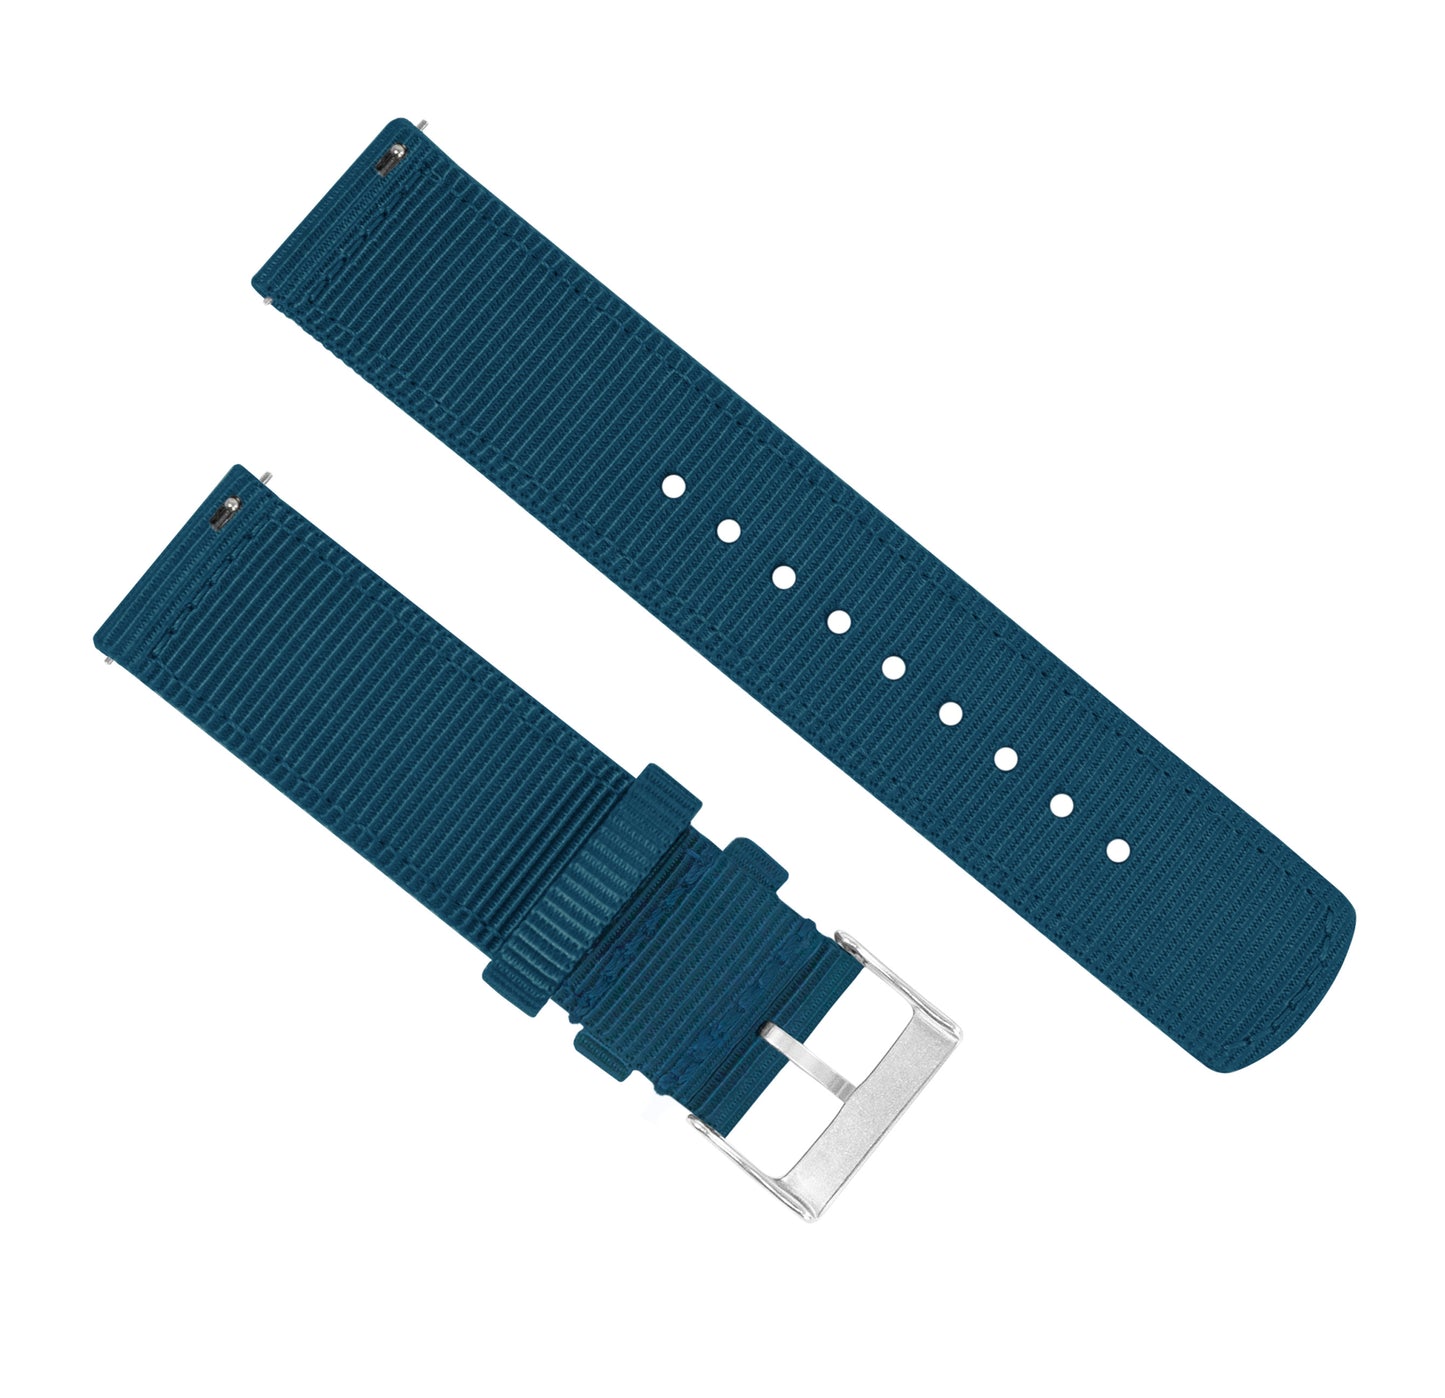 Amazfit Bip | Two-Piece NATO Style | Steel Blue - Barton Watch Bands